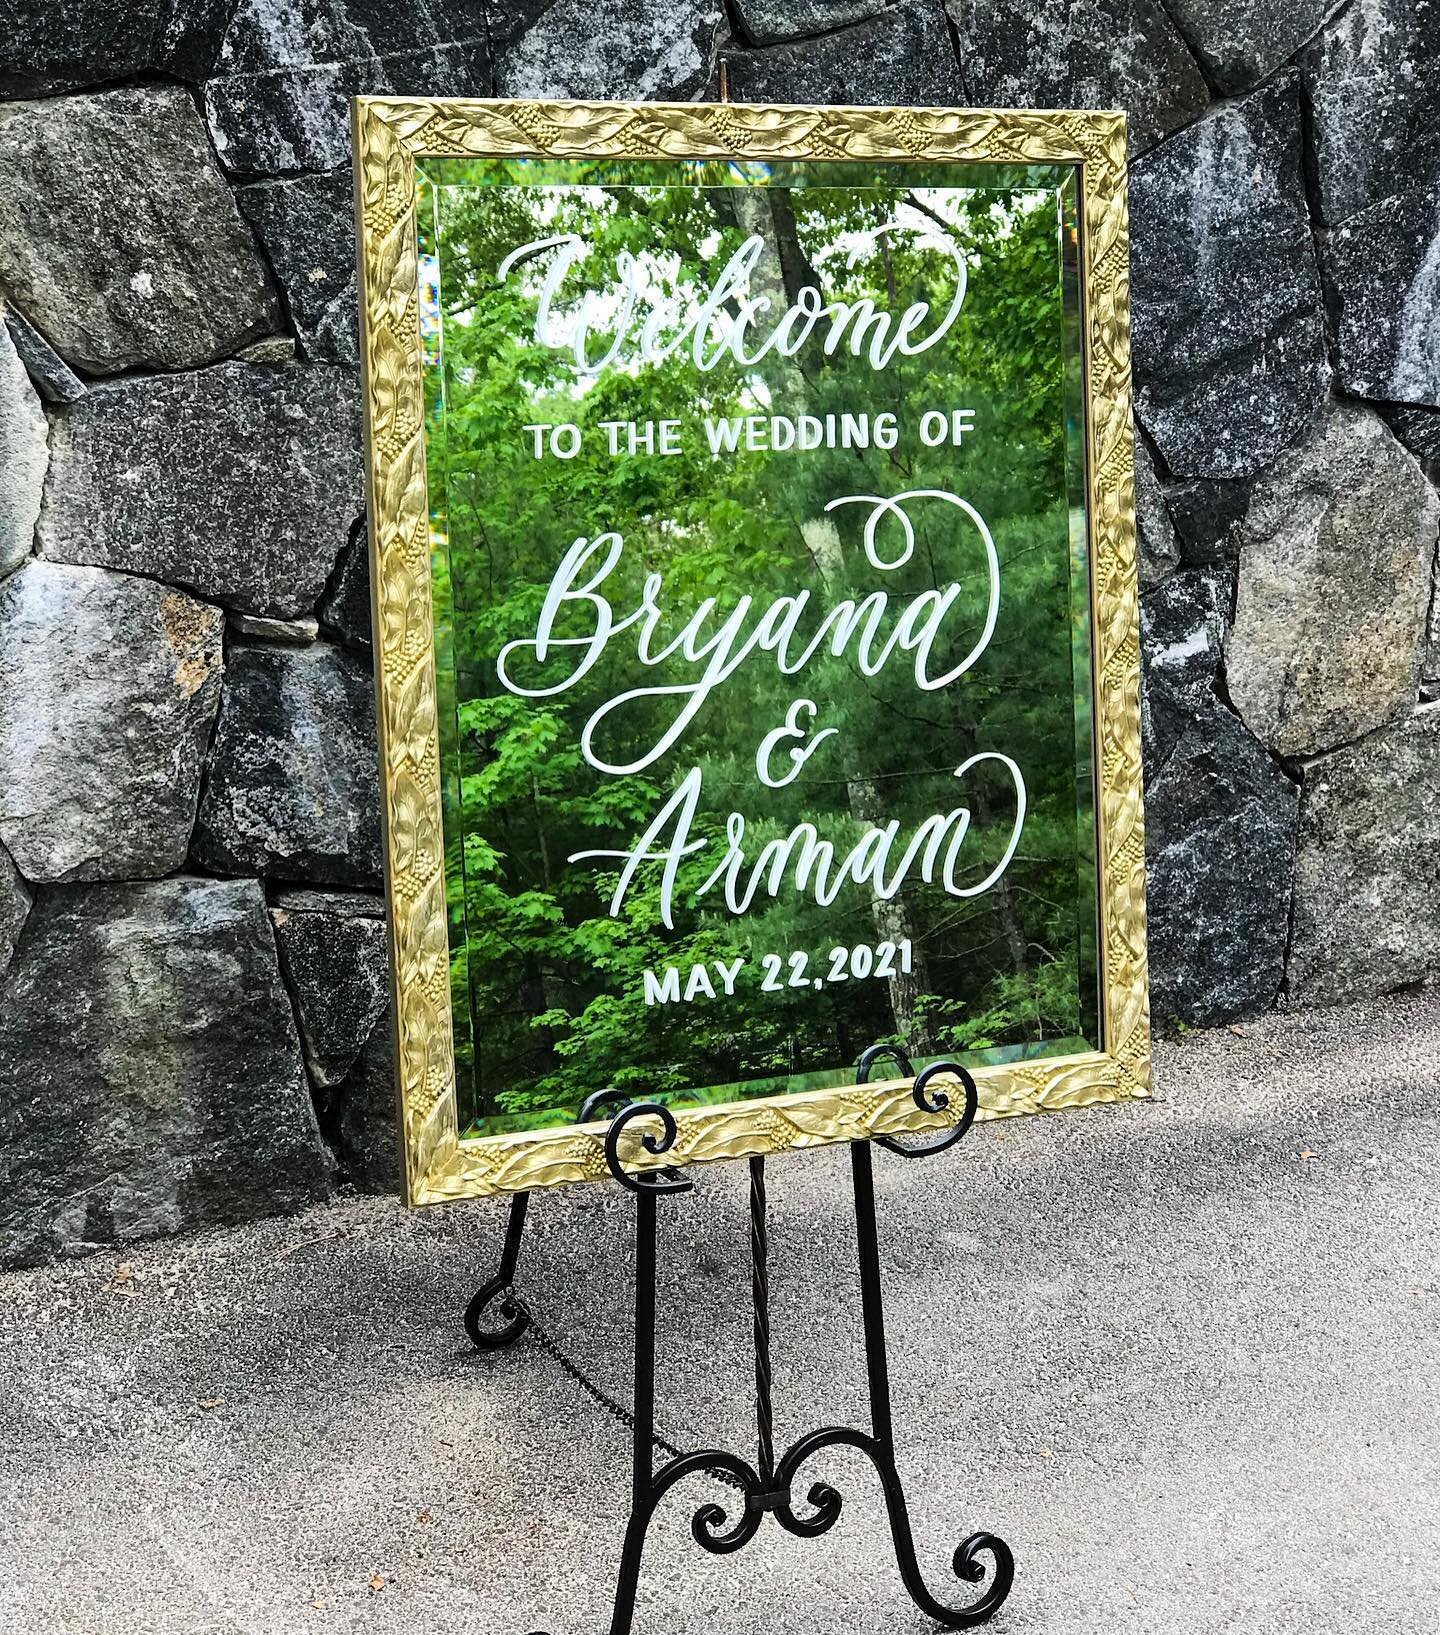 A beautiful day for a wedding! Congratulations Bryana &amp; Arman! Can&rsquo;t wait to see these set up at the gorgeous @connemarahouse 🥰
.
.
#weddingsignage #weddingsign #handmadesigns #bostonweddings #bostonweddingvendor #handlettered #moderncalli